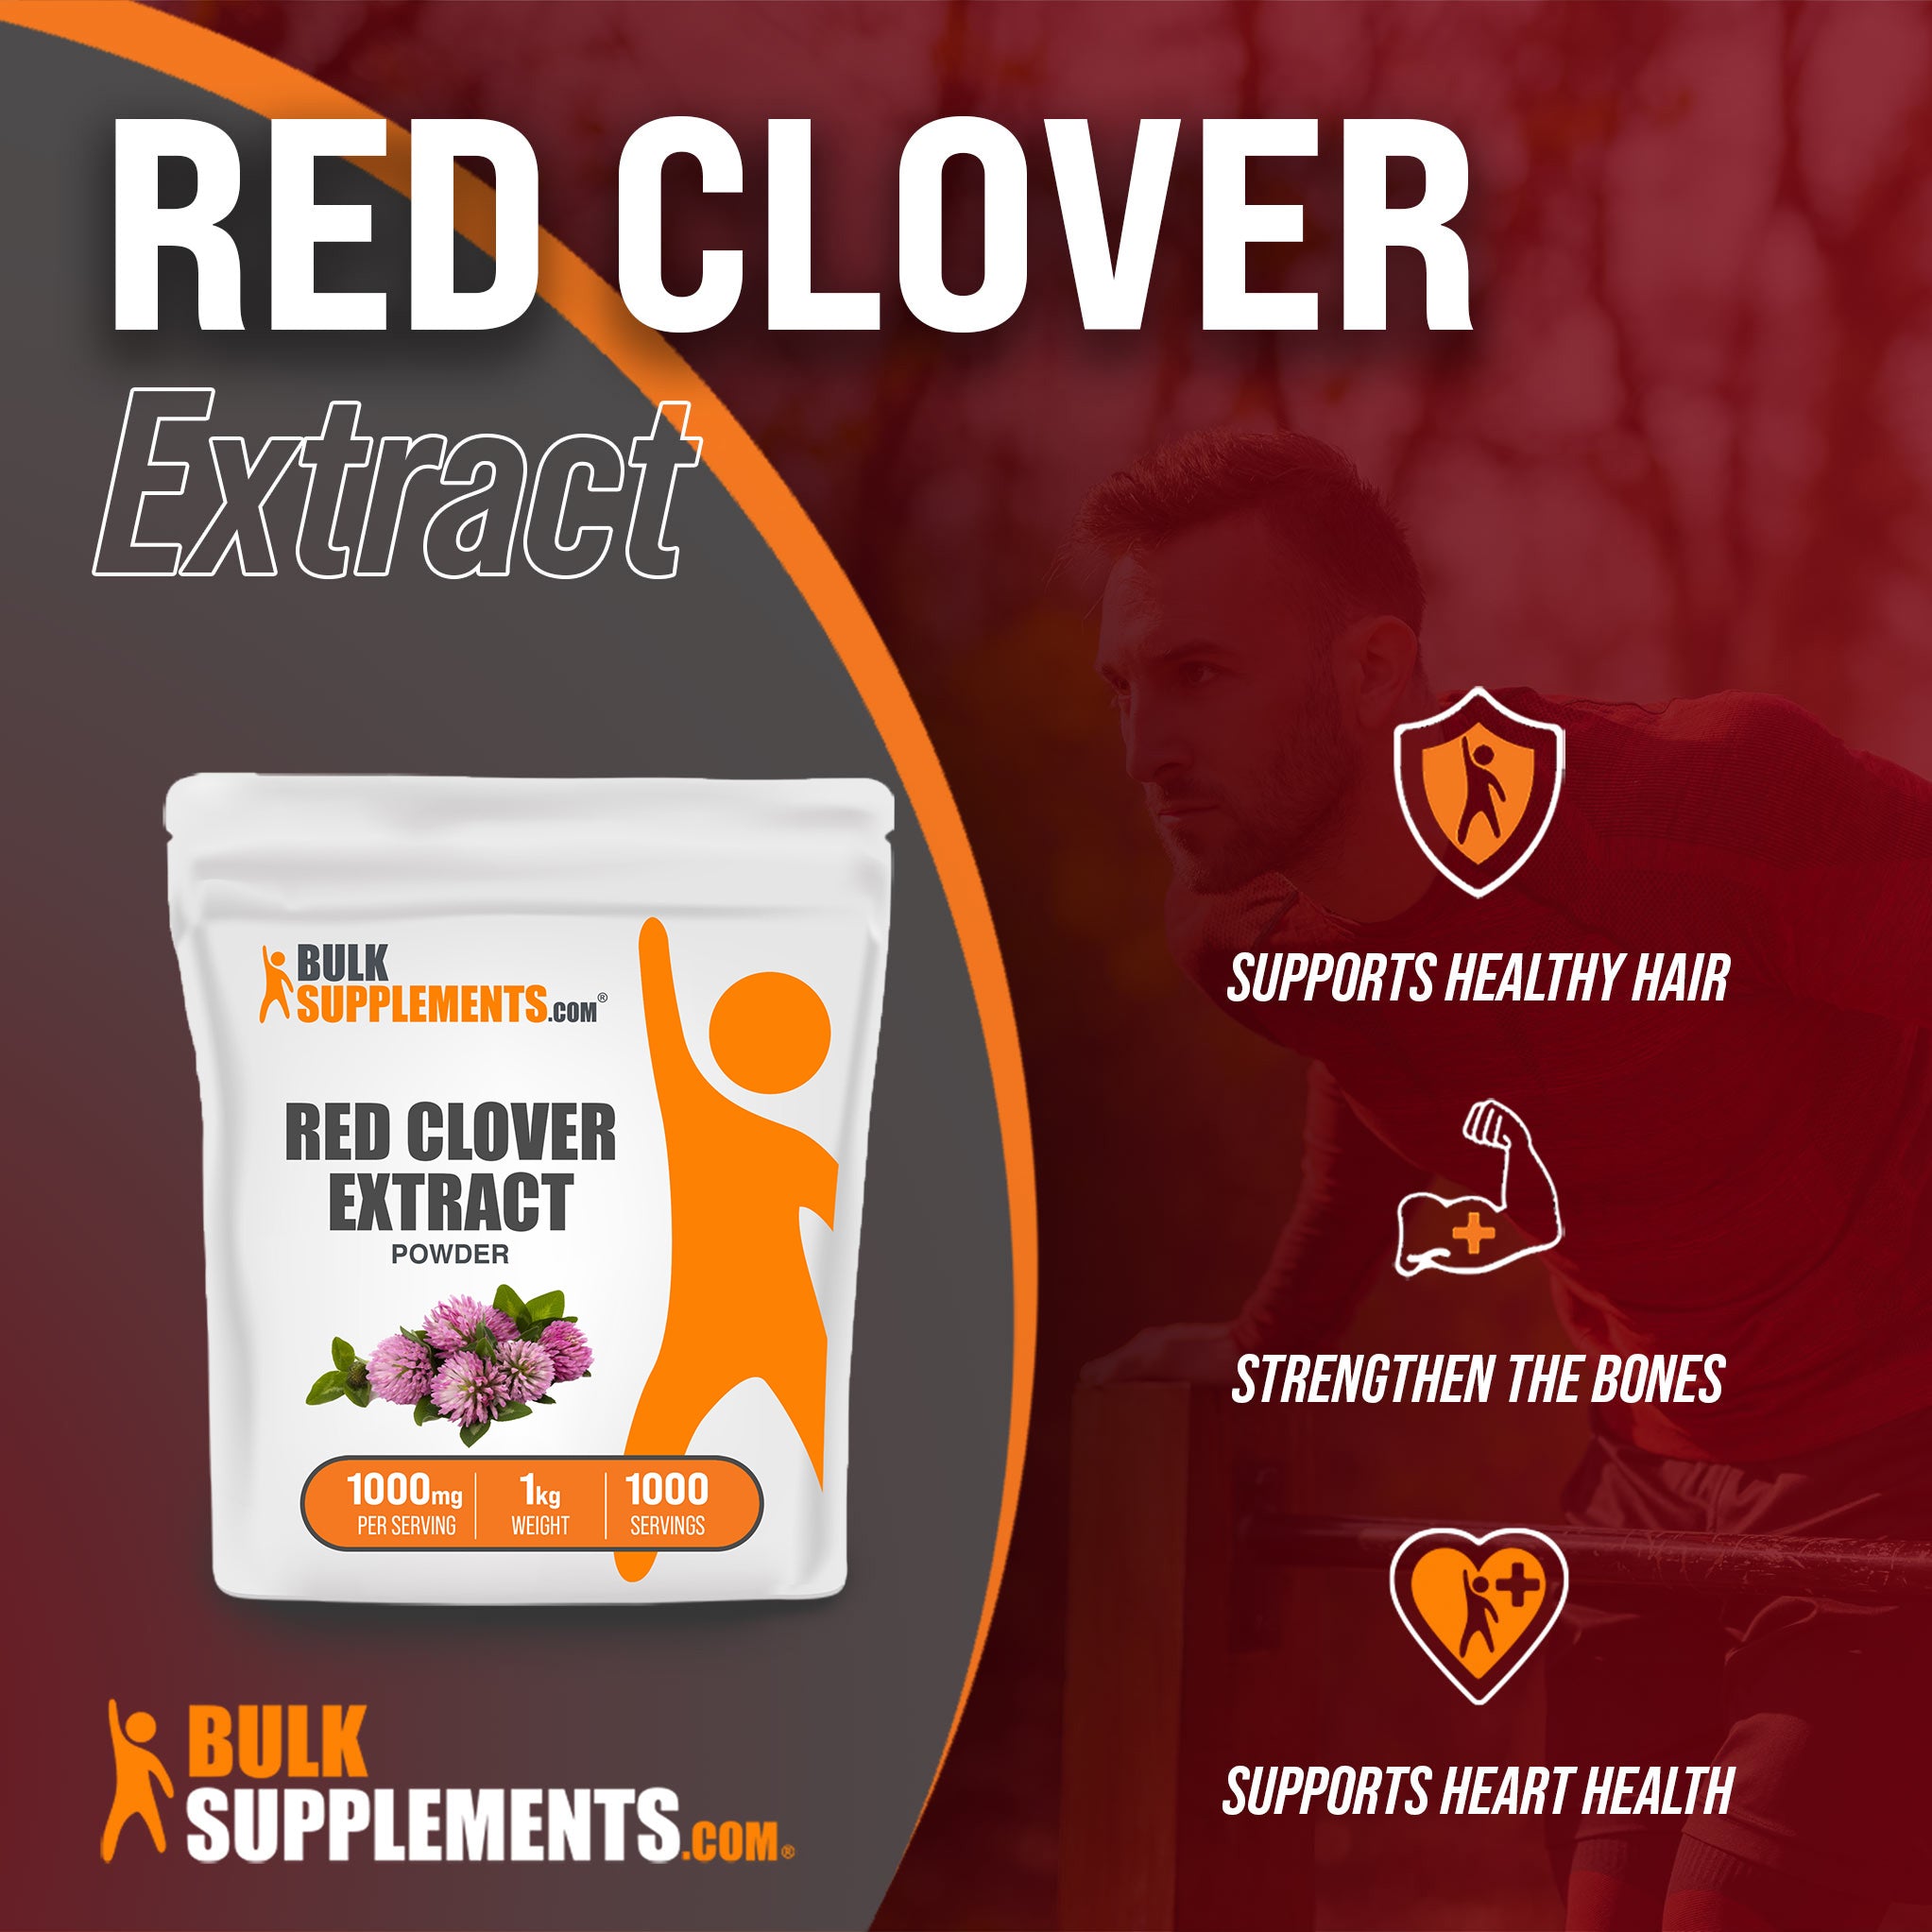 Benefits of Red Clover Extract: supports healthy hair, strengthen the bones, supports heart health